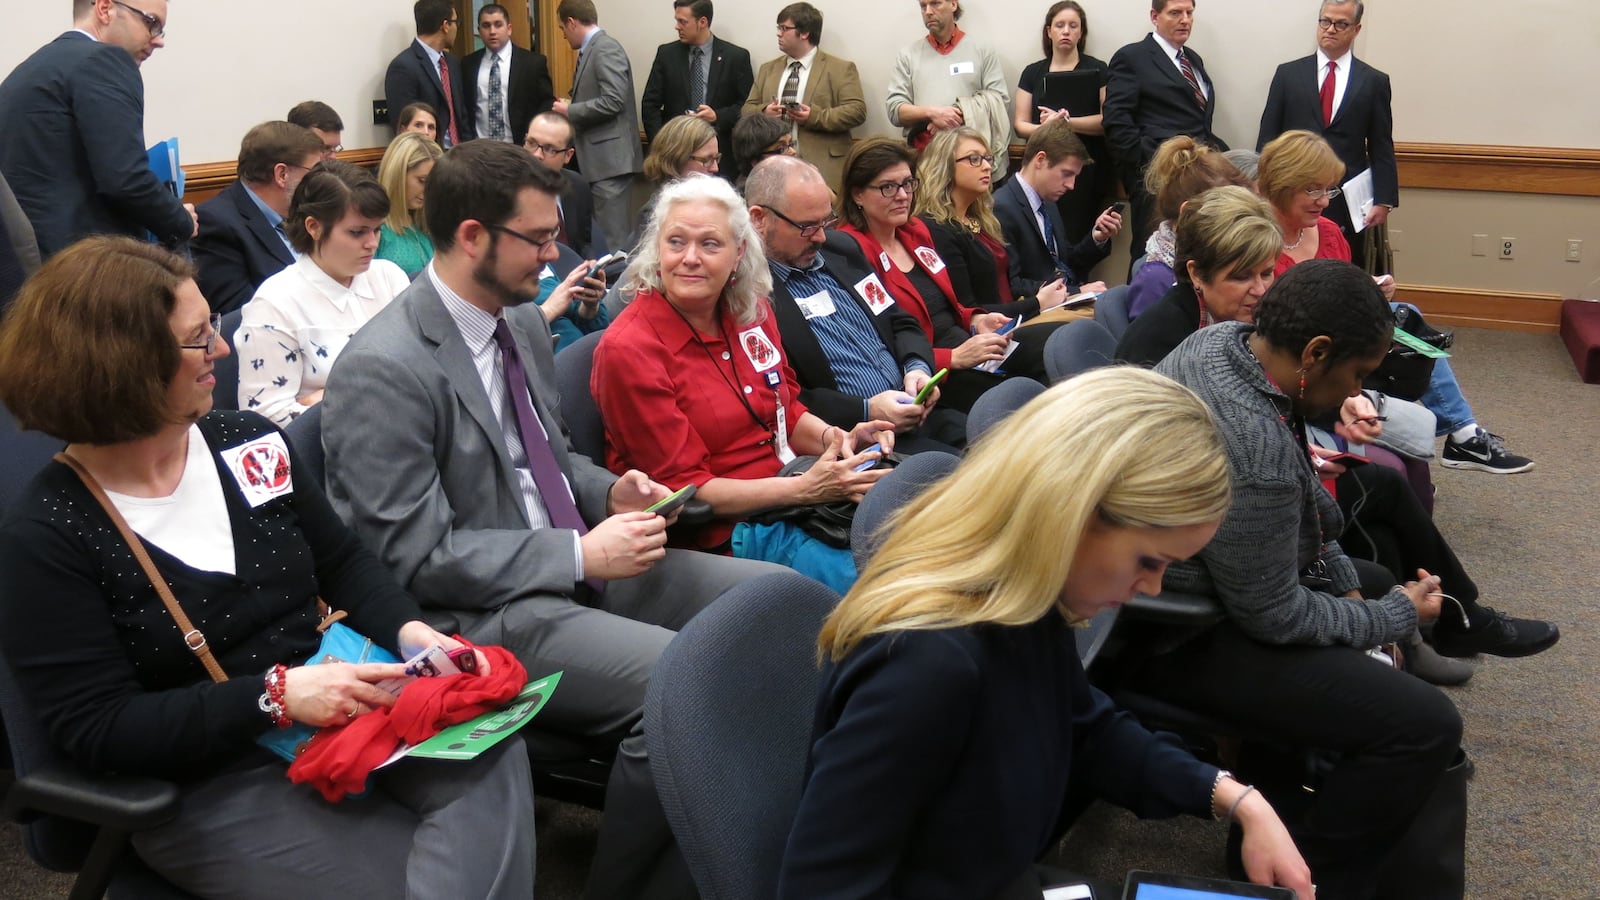 A capacity crowd, including many public school teachers, attend Tuesday's House subcommittee meeting in Nashville where a private school voucher was debated.